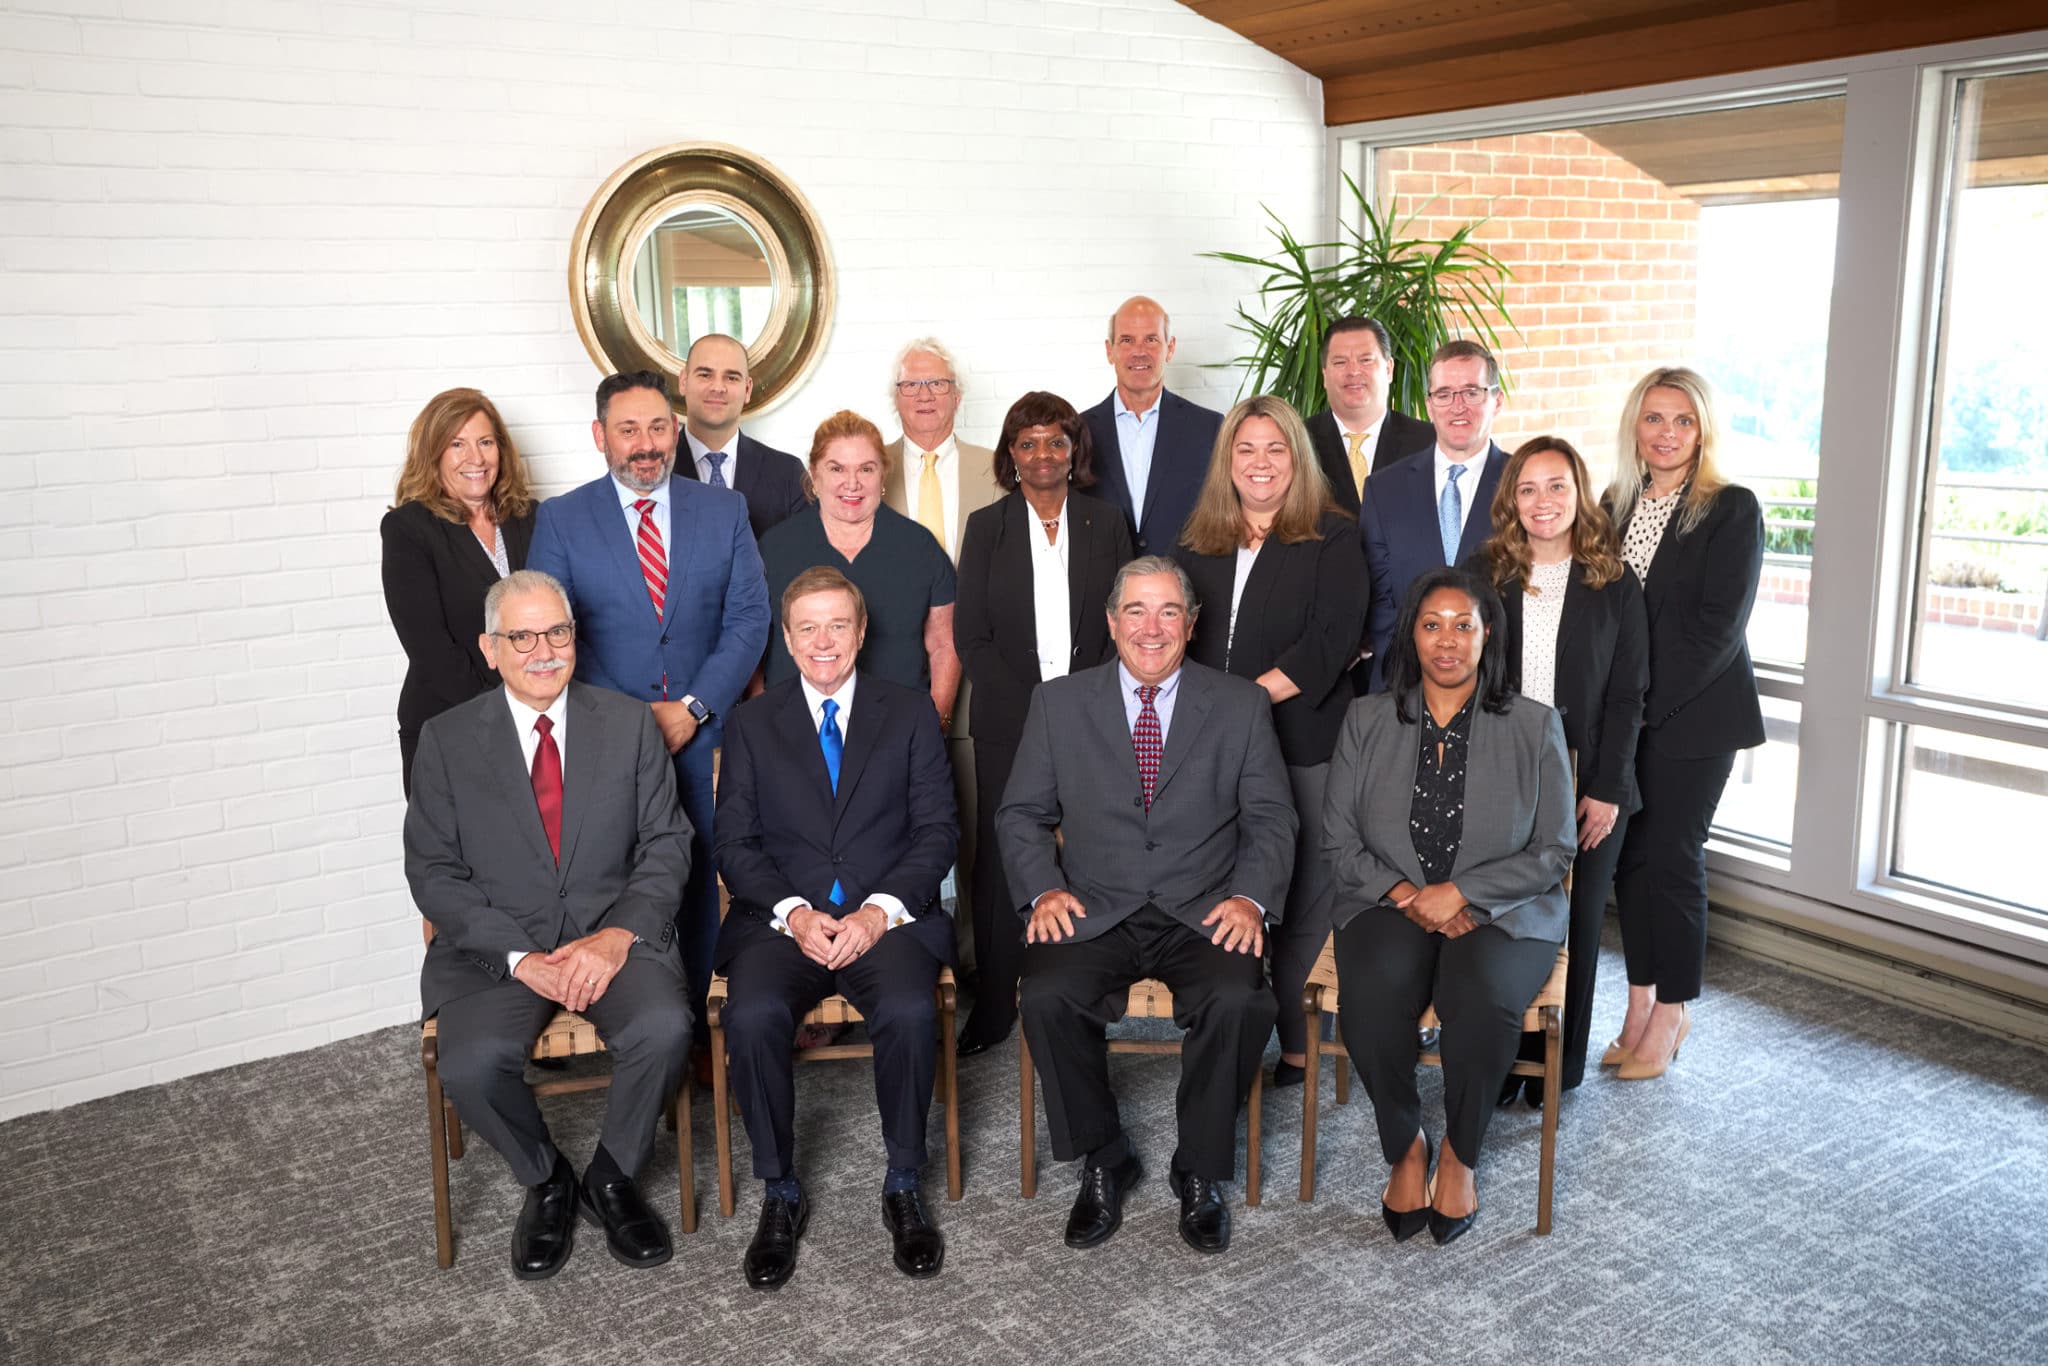 Community Options’ trustees and officers at the annual Board of Directors meeting on May 22, 2022